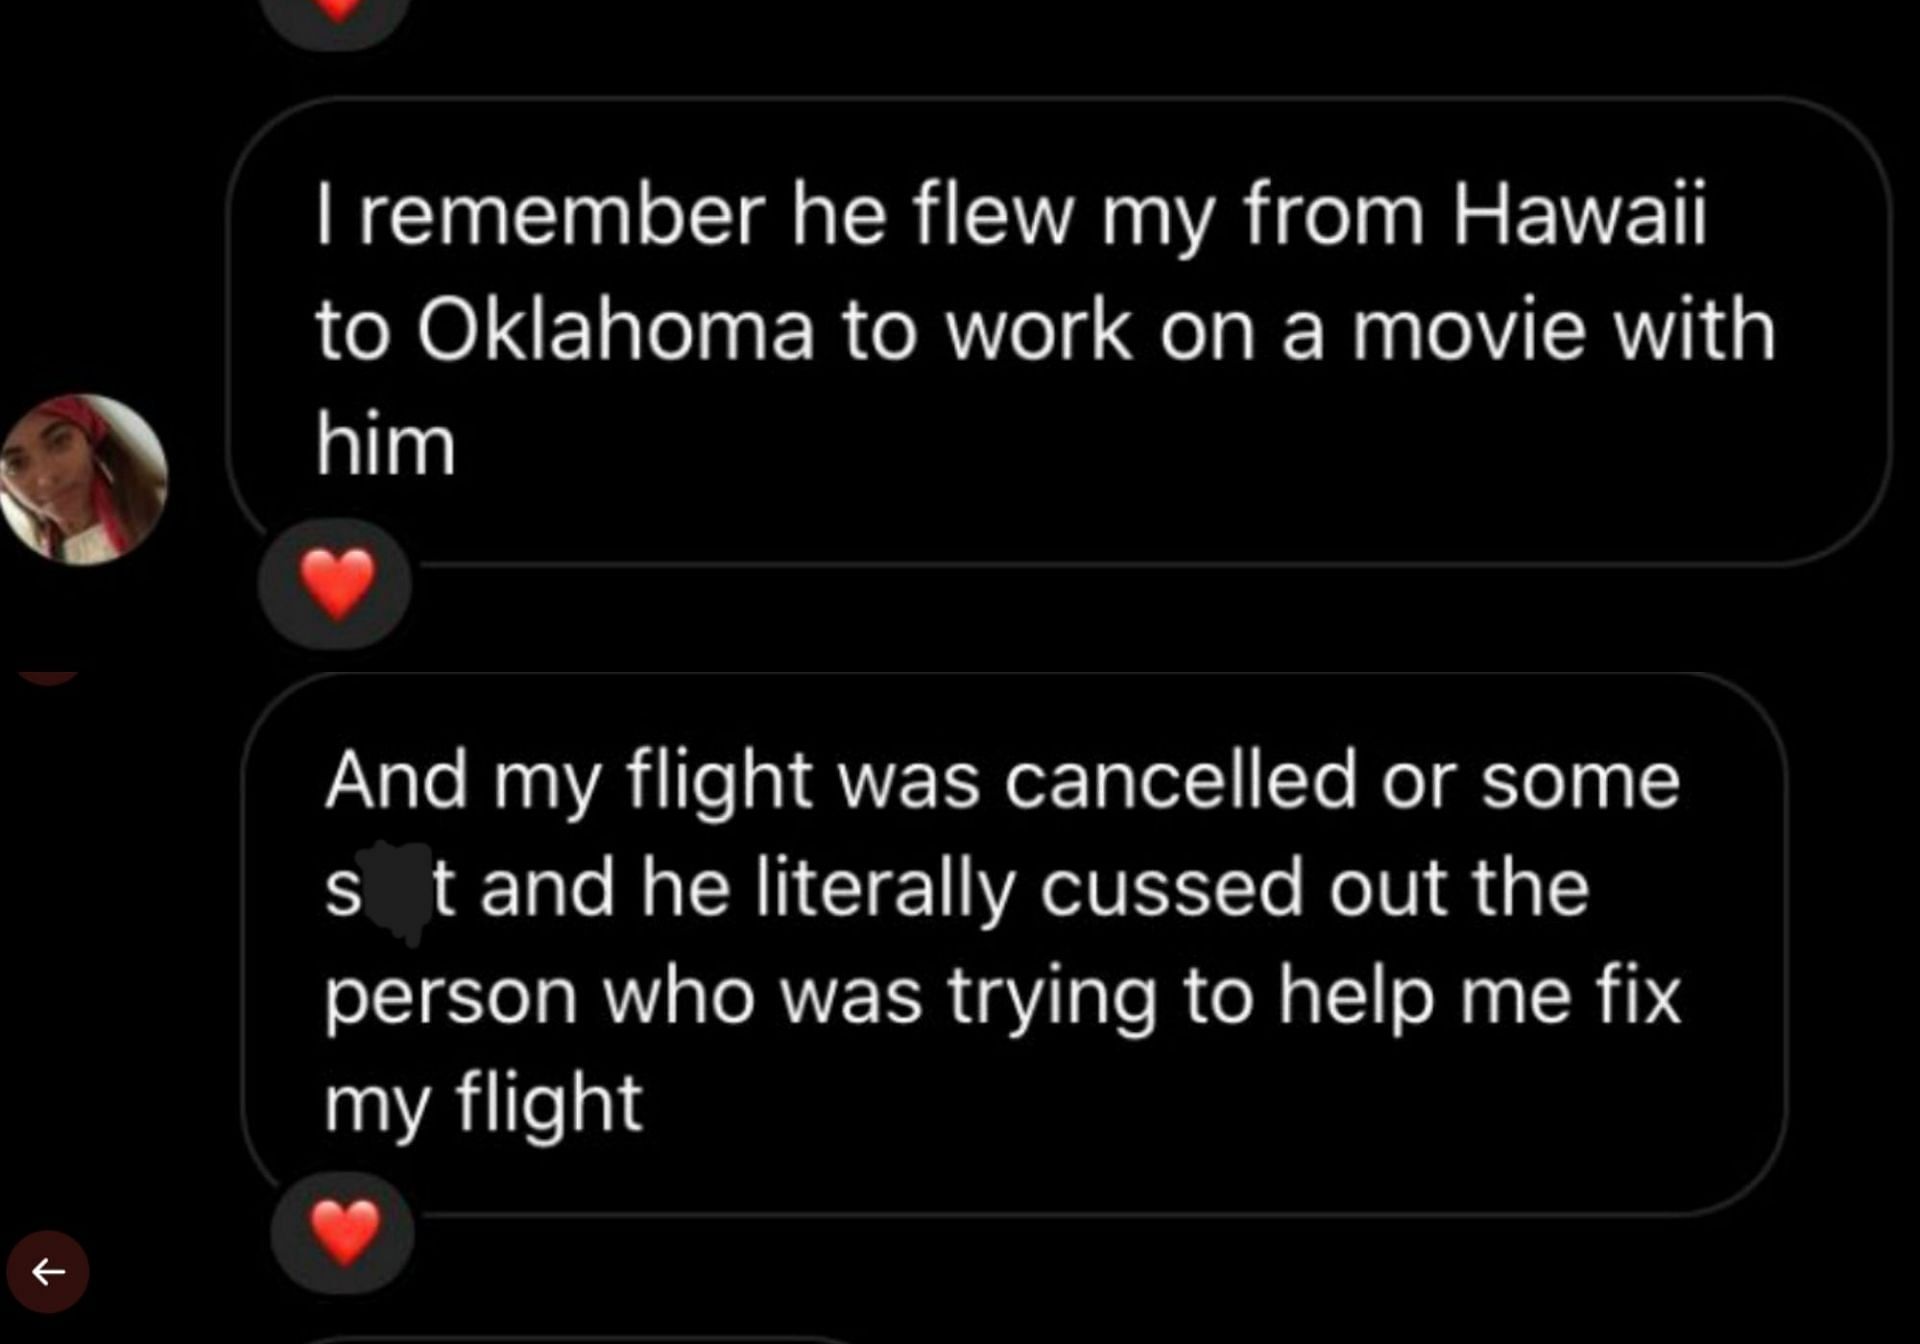 Mia Solange shares Ezra Miller cussed at someone who was helping the former to sort their canceled flight ticket (Image via lotsofgaycrimes/Twitter)